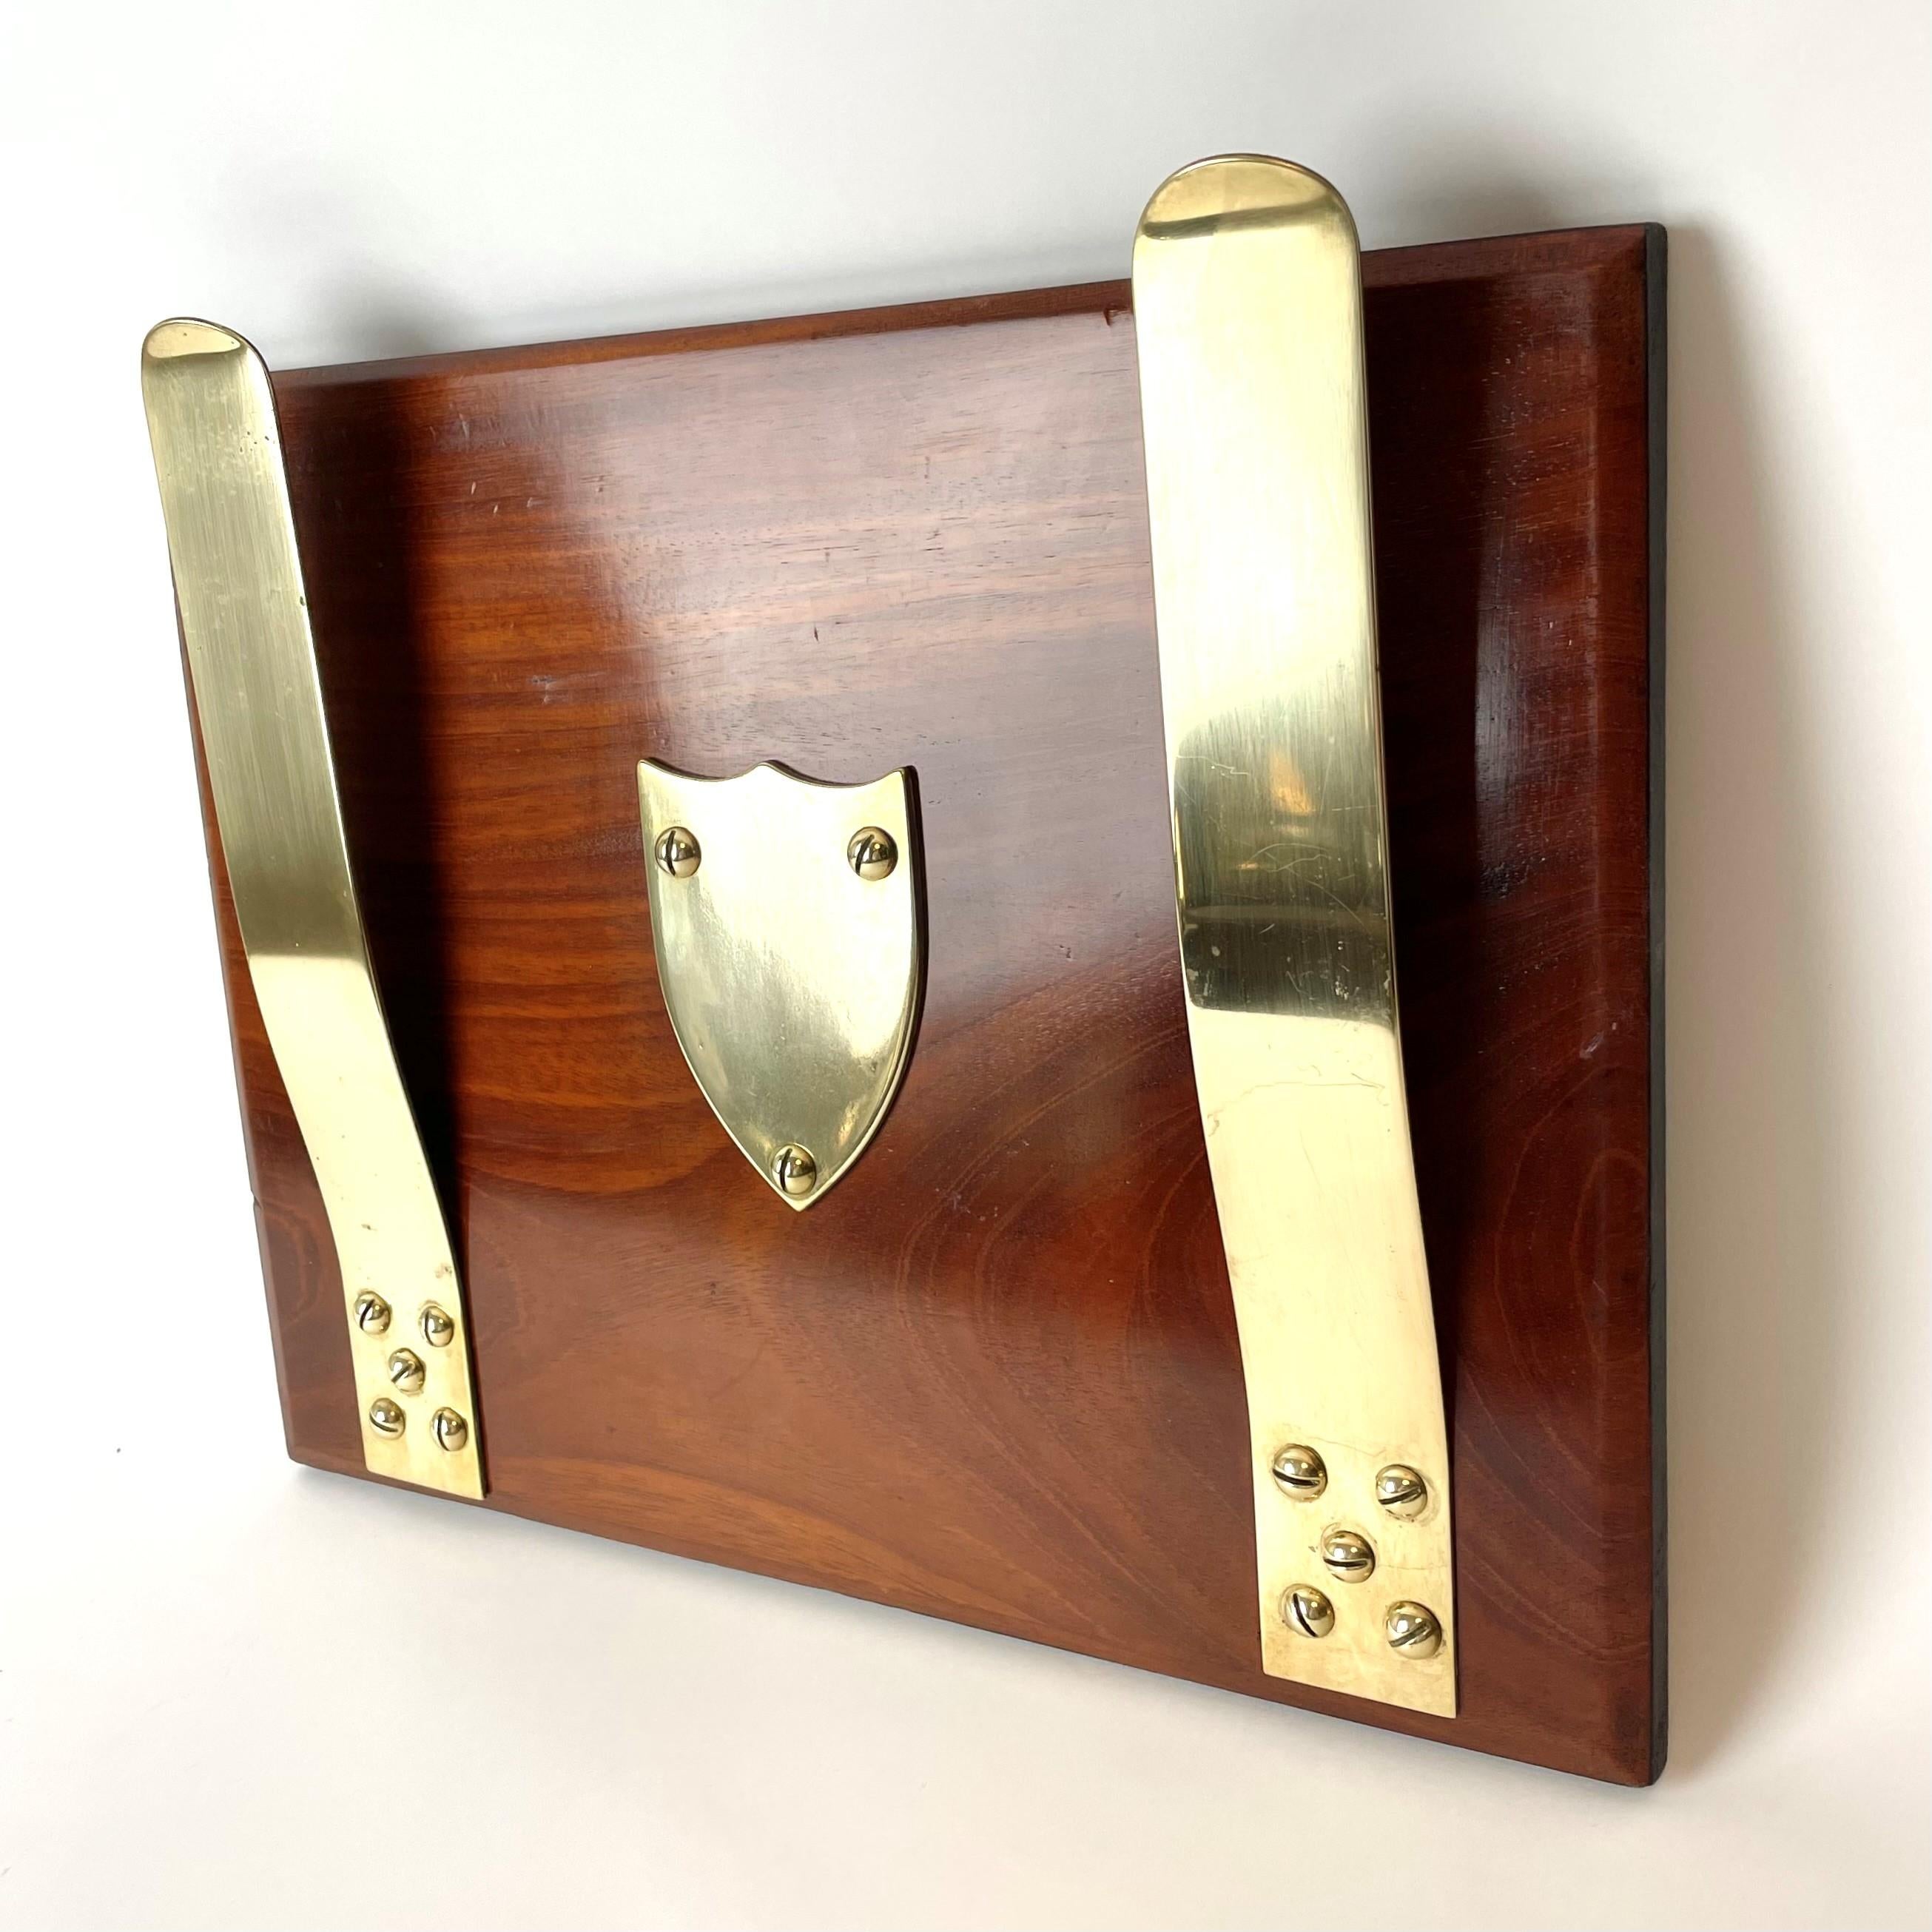 Elegant & rare magazine holder in mahogany (Swietenia mahagoni) and brass. England, early 20th Century with a beautiful brass shield in the middle. Still relevant for daily newspaper or interior design magazines.

Wear consistent with age and use.